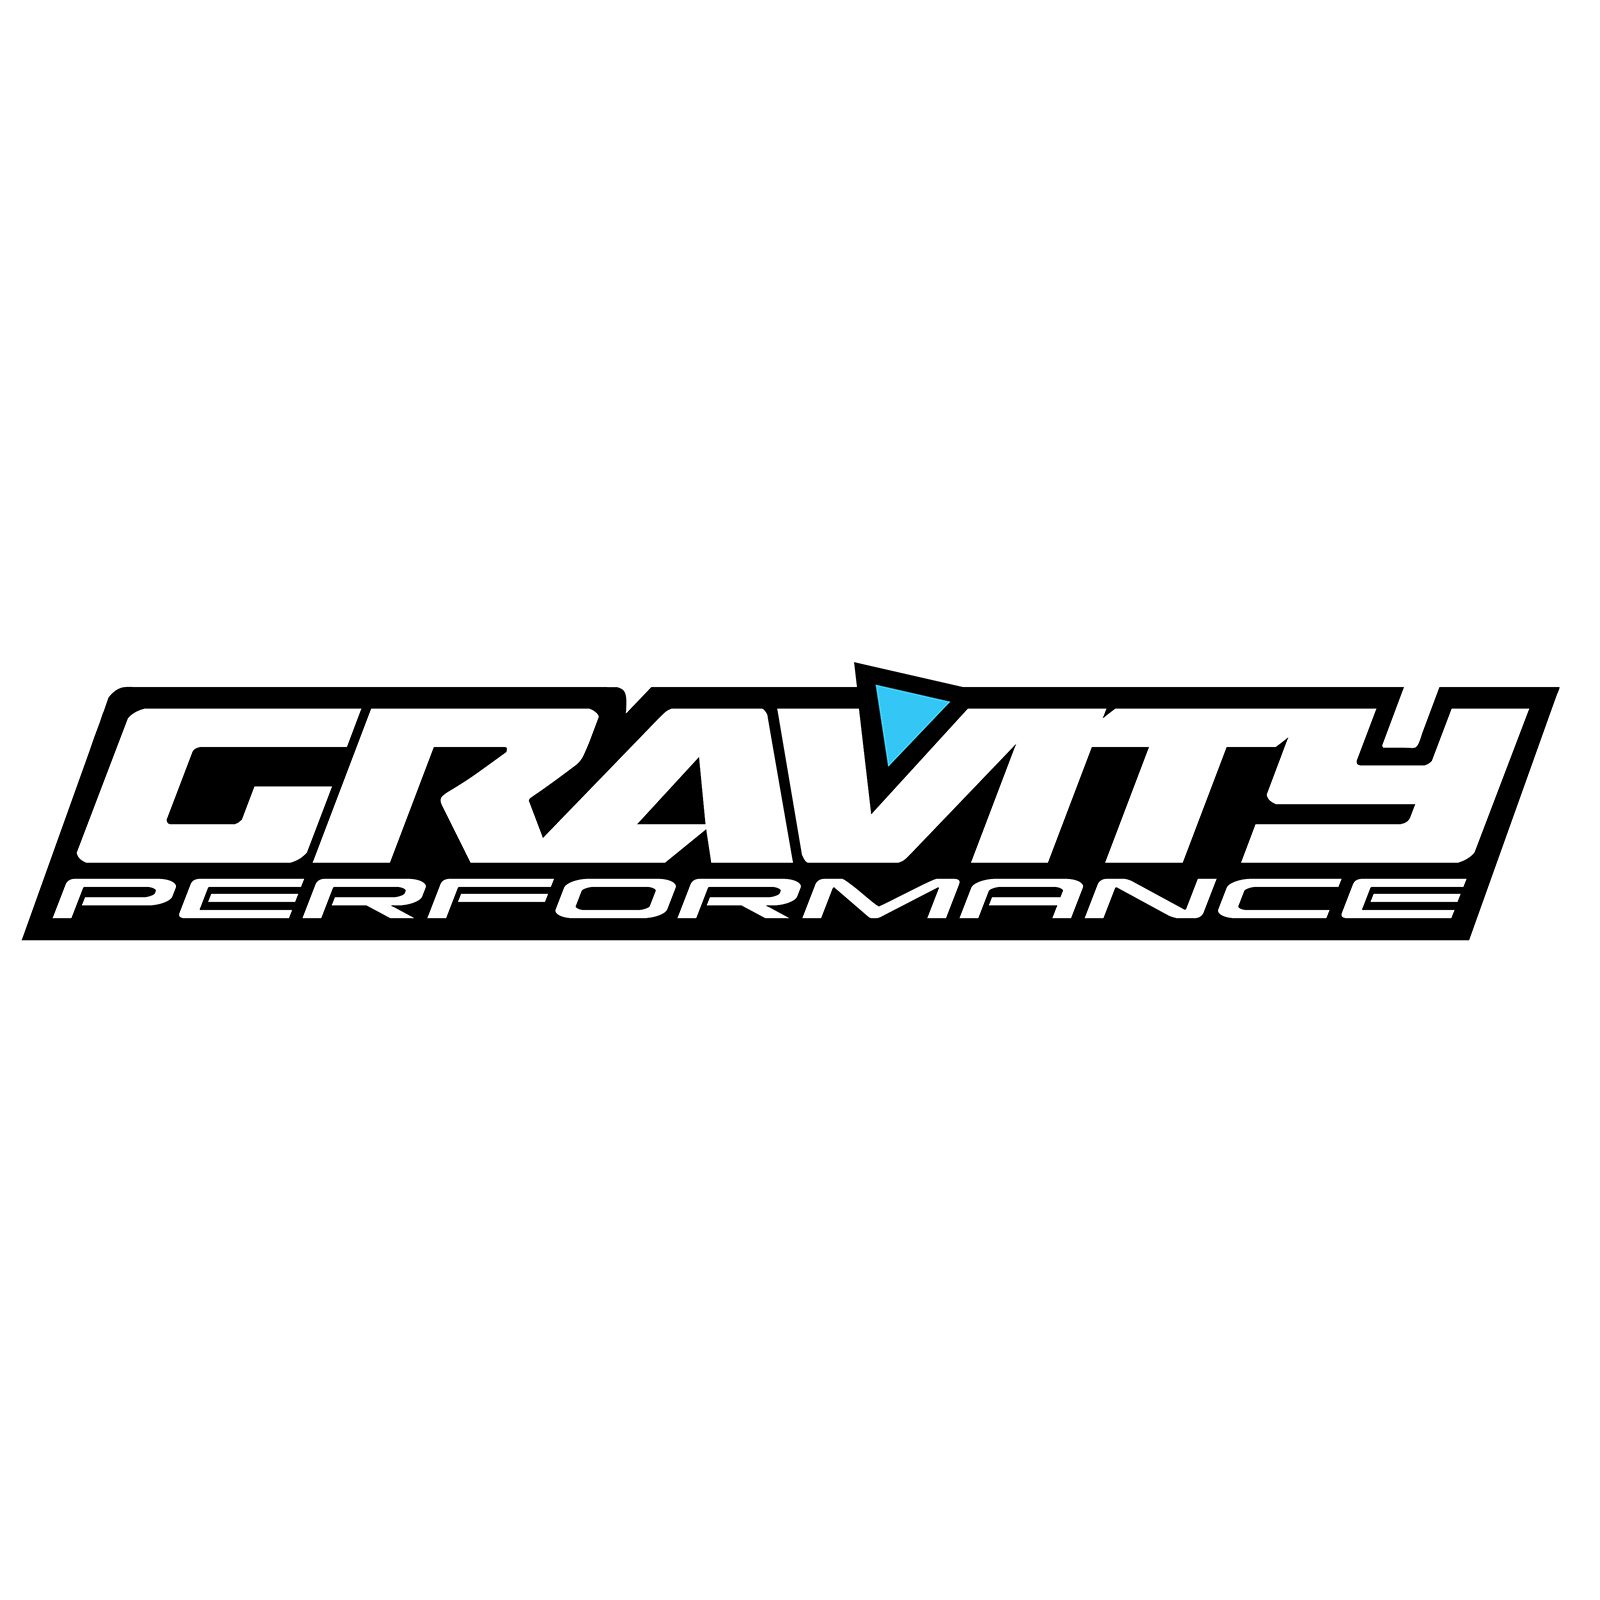 Gravity Performance Coupons and Promo Code